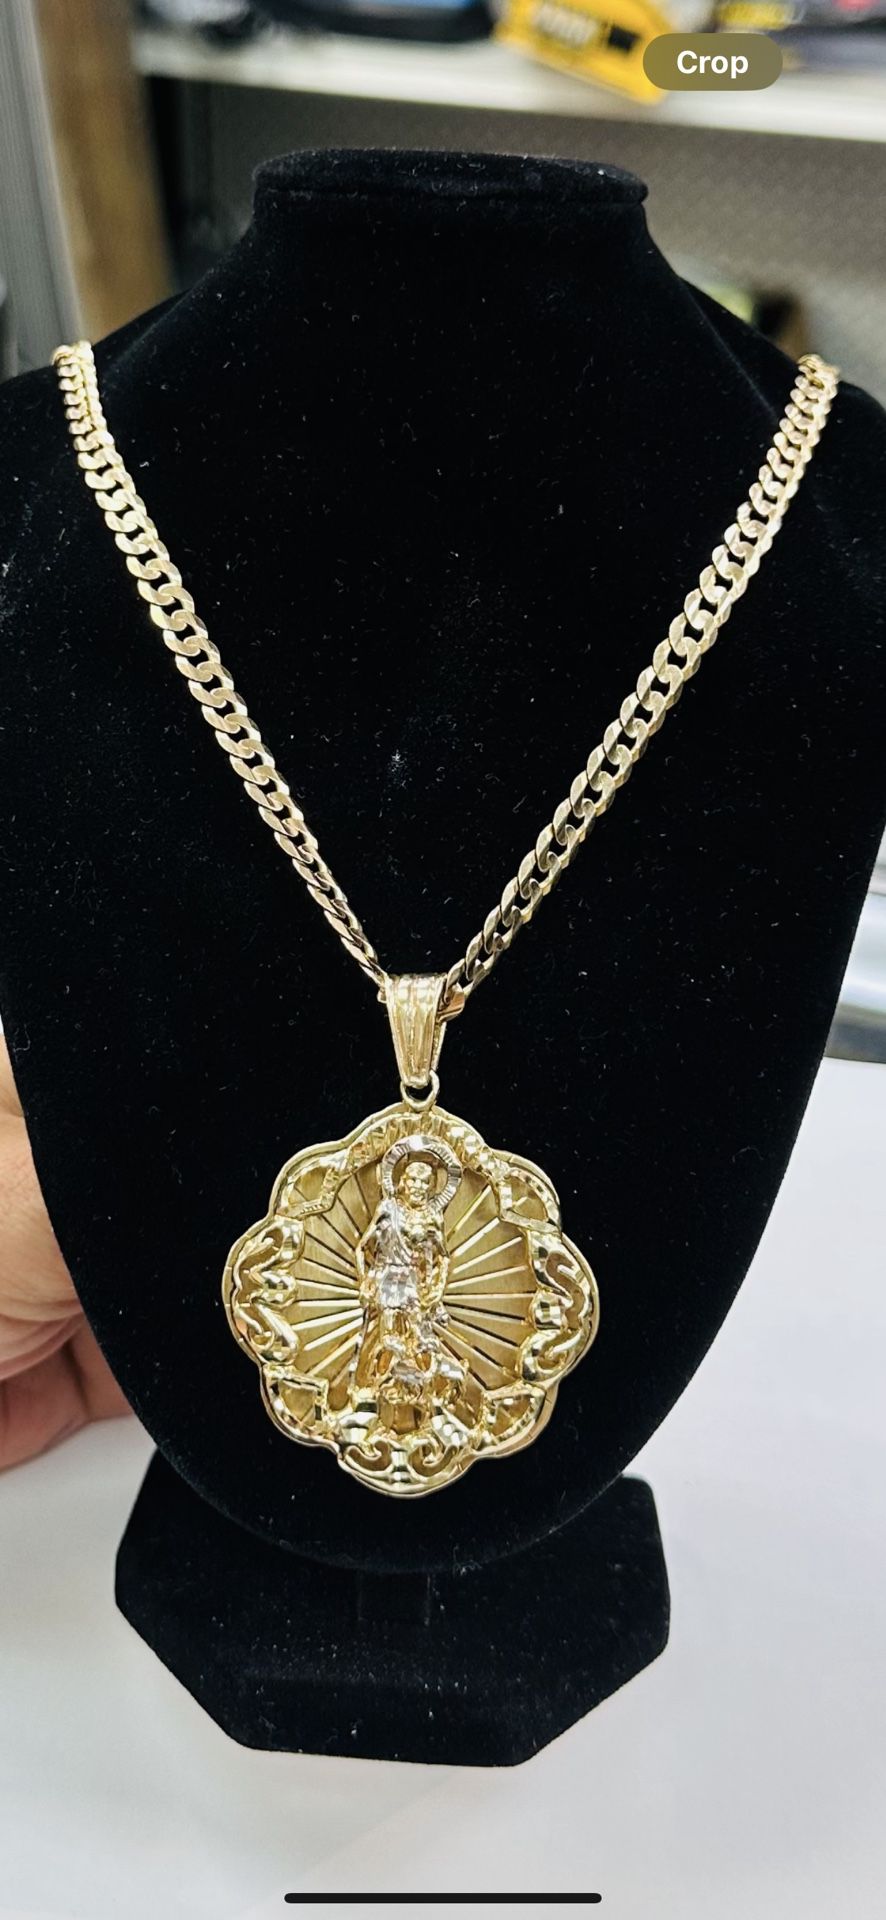 10K Yellow Gold 22" 6mm Curb link (cuban) chain necklace with Large 2.5" St Saint Lazaro pendant/charm- Weights 52.6 grams